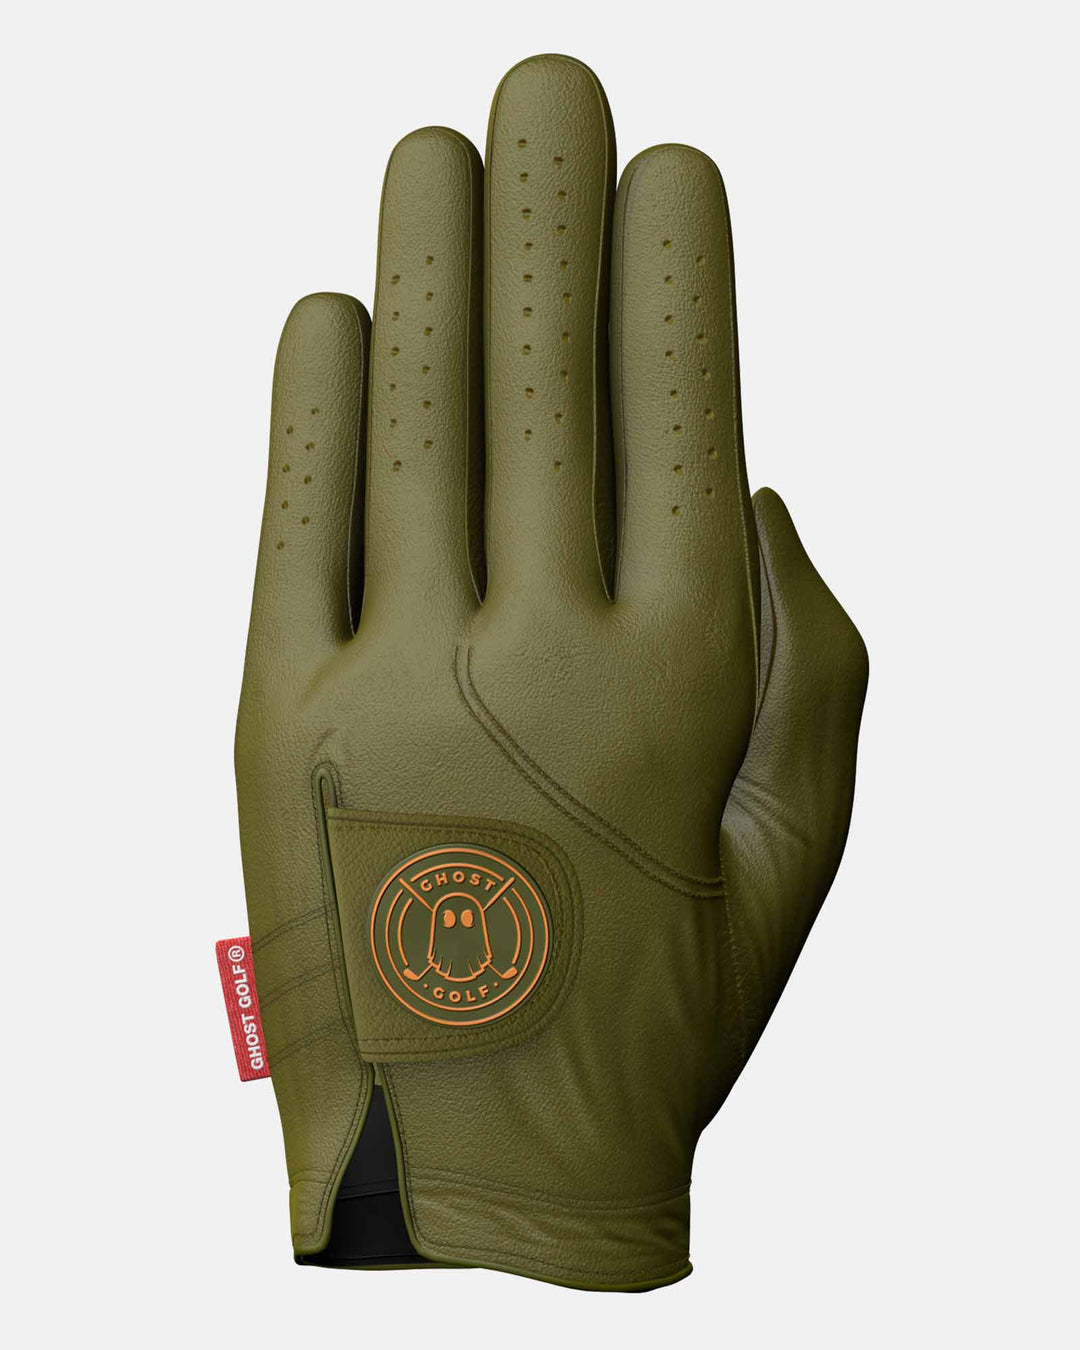 Ghost Golf AAA Cabretta Golf Glove Color Olive Green